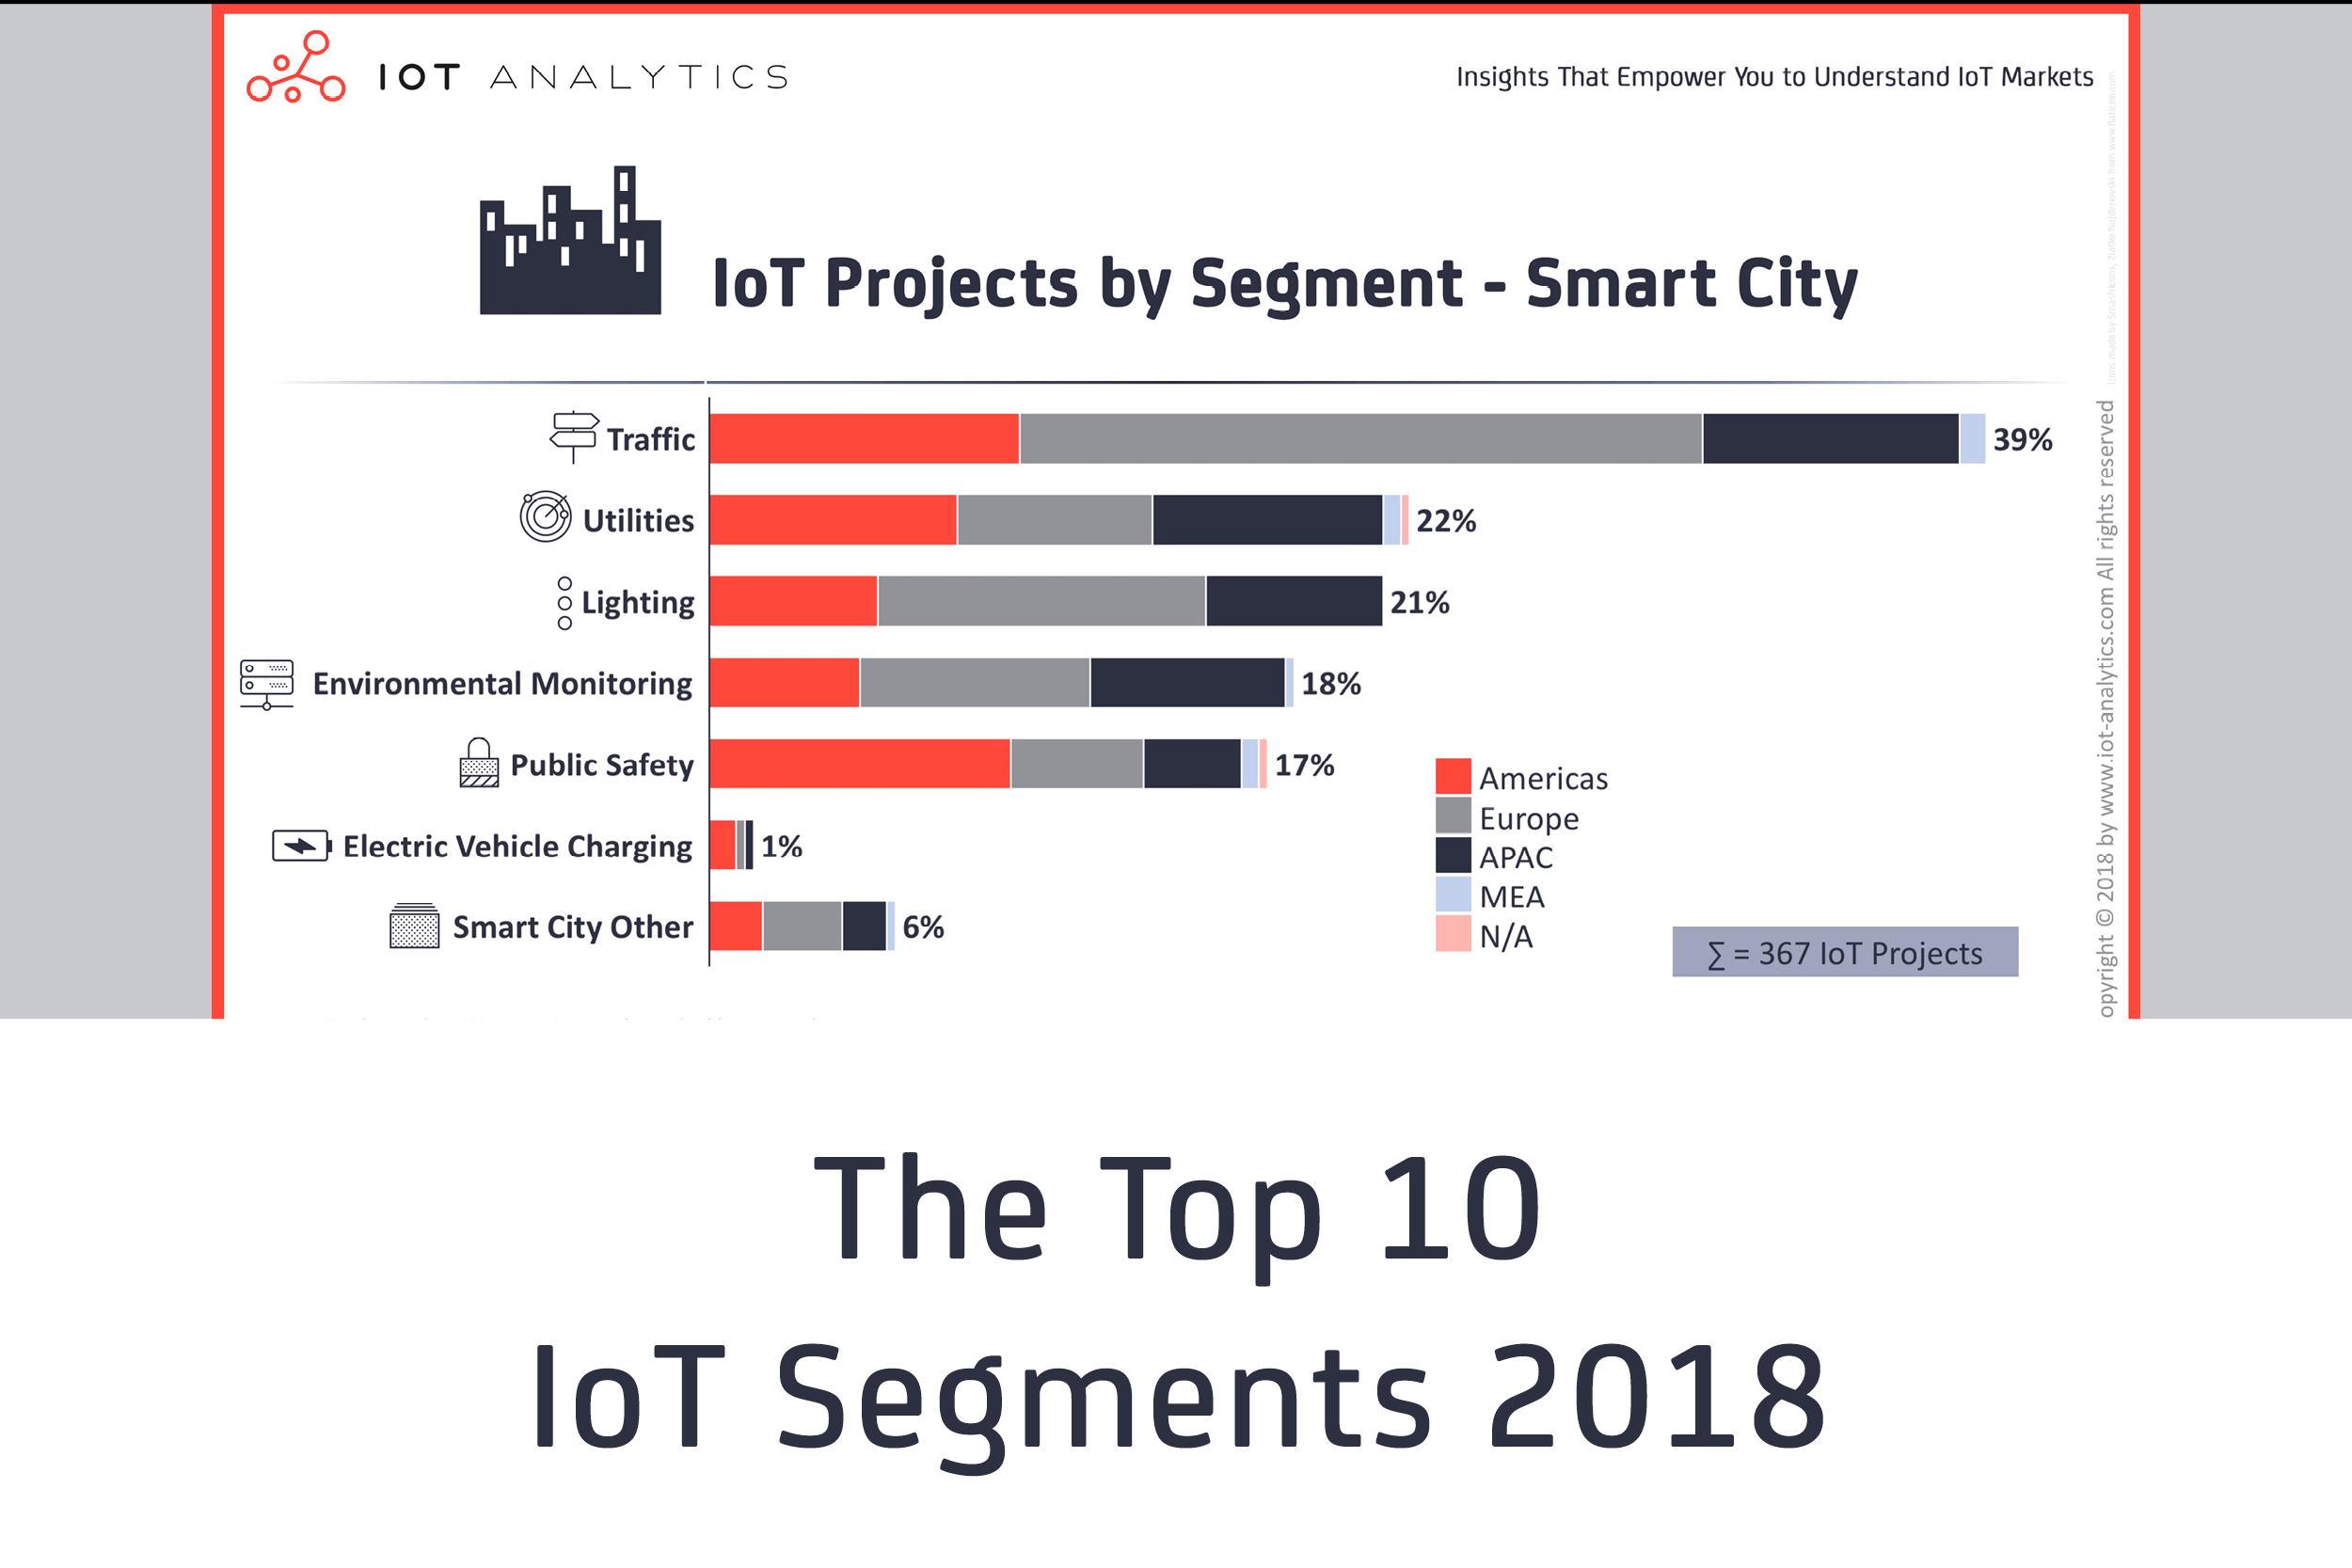 iot_projects_top_10_iot_segments_in_2018_featured_image